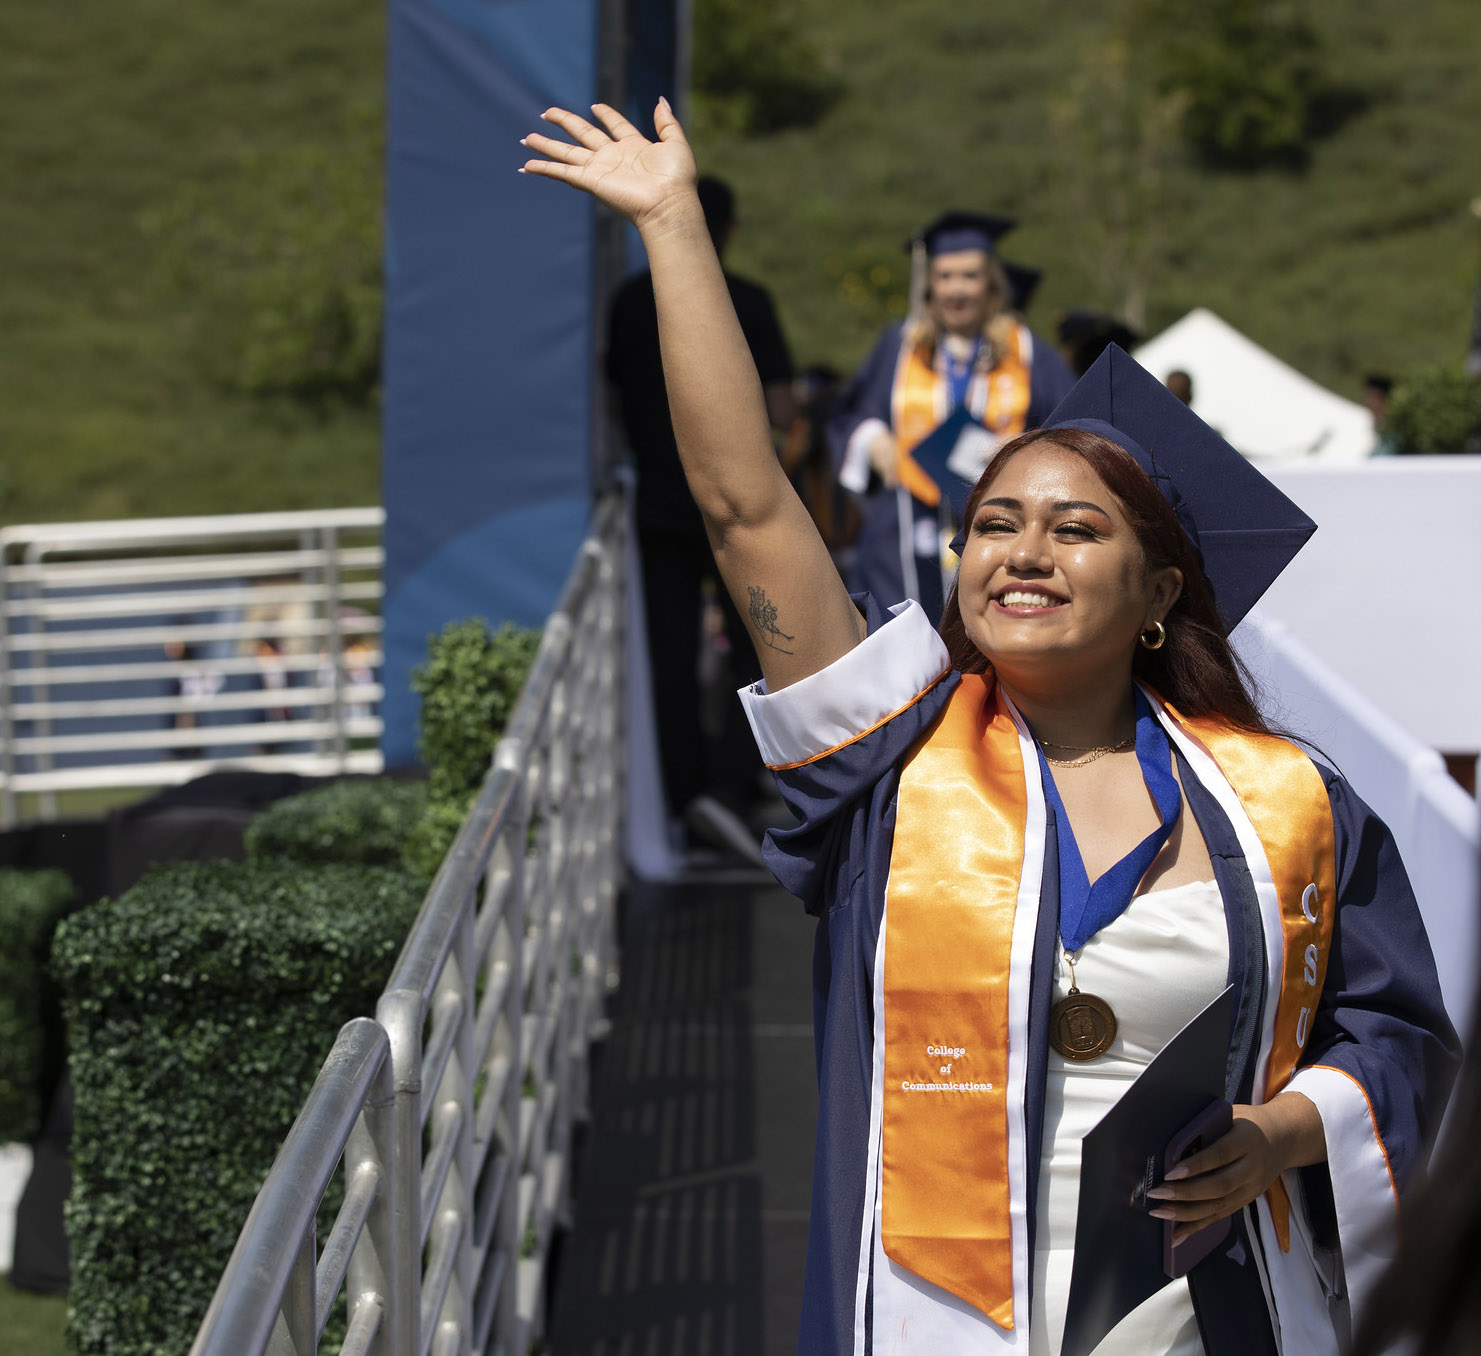 Latina student waves at crowd as she walks offstage after receiving her diploma during commencement.